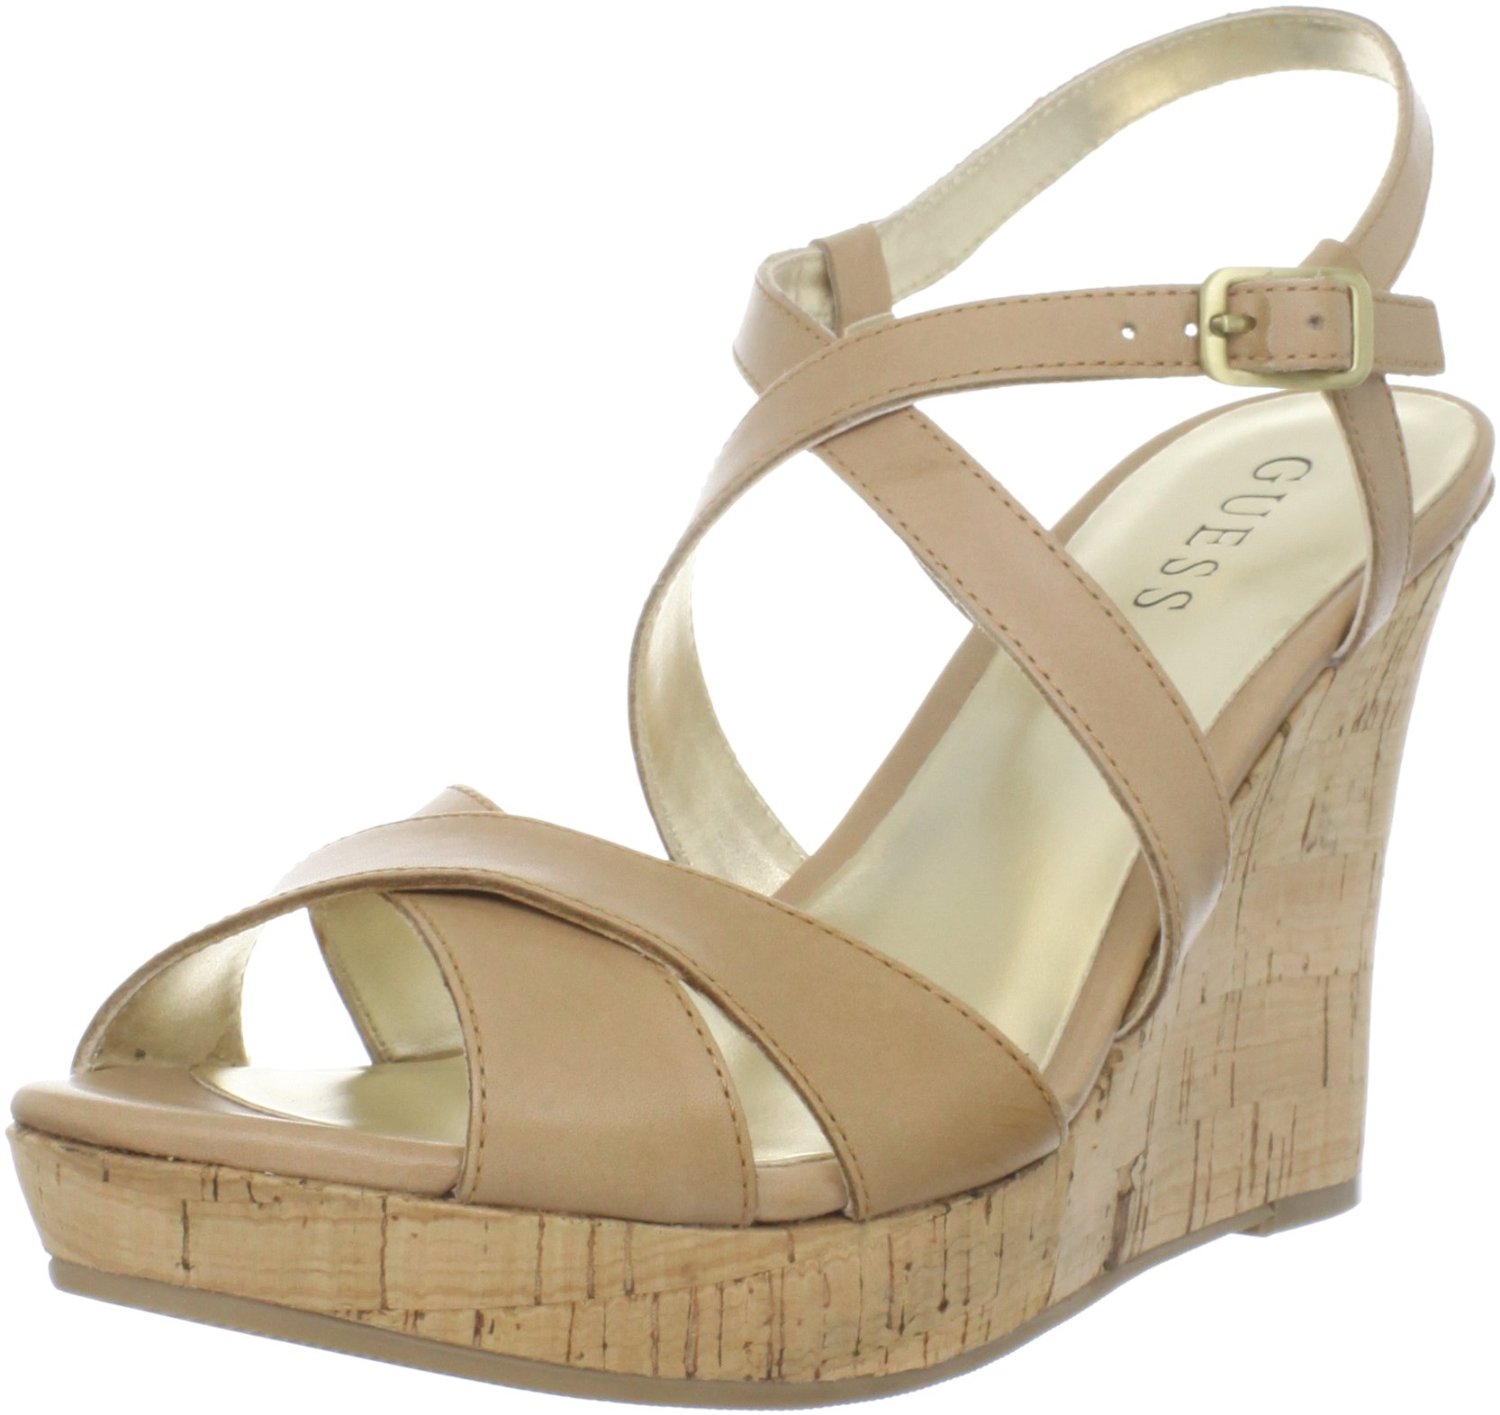 Guess Pernella Wedge Sandals in Beige (light natural) | Lyst